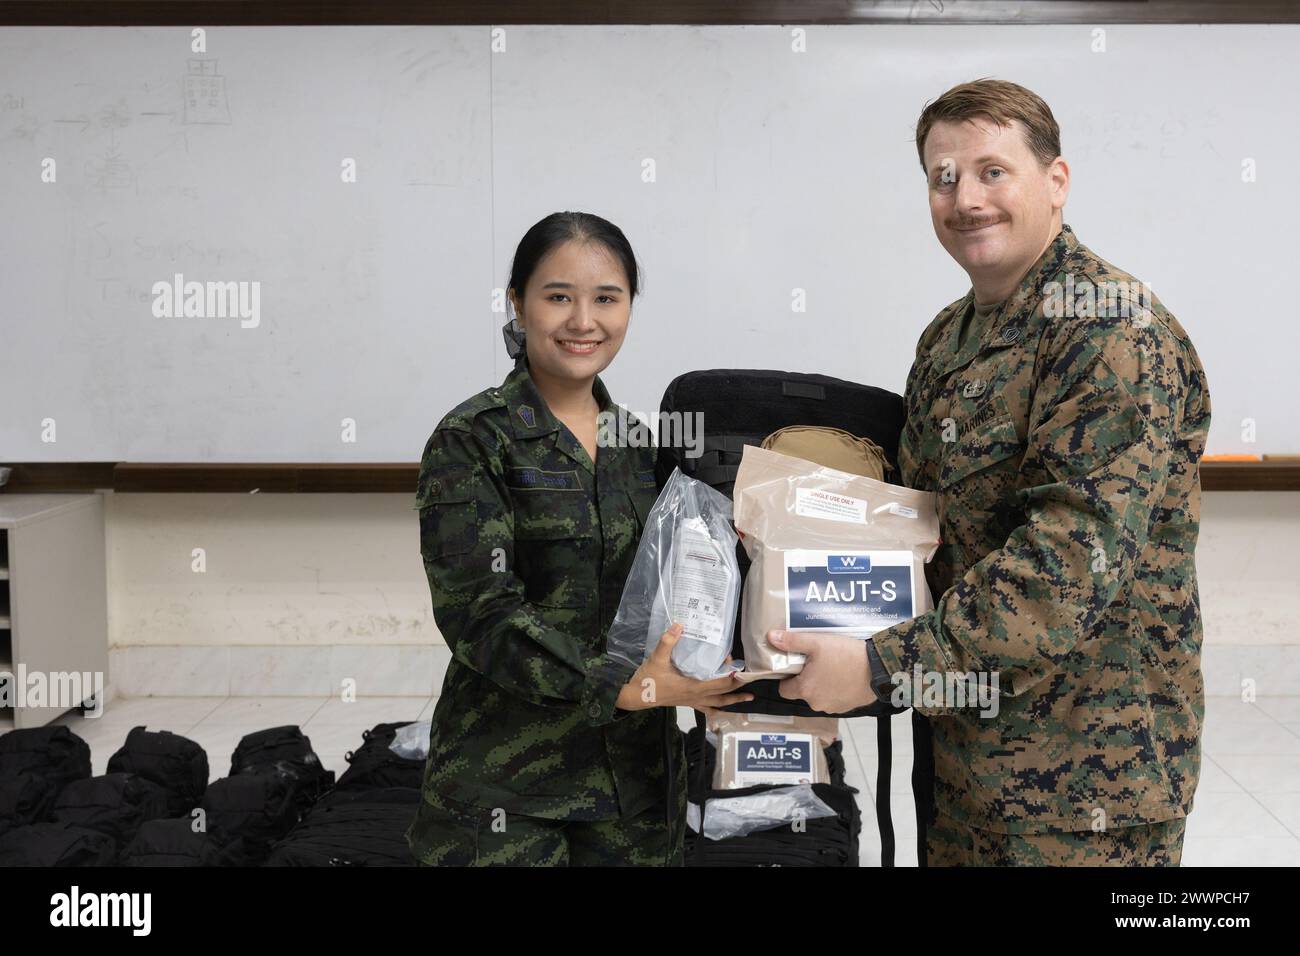 U.S. Marine Corps Gunnery Sgt. Pierce Draper, right, the Humanitarian Mine Action (HMA) Thailand team leader with Explosive Ordnance Disposal (EOD) Company, 9th Engineer Support Battalion, 3rd Marine Logistics Group, presents medical supplies to Royal Thai Army Lt. Wasinee Theerawong, a nurse with Fort Weerawat Yothin Hospital, during a landmine casualty care (LCC) course graduation at Fort Bhanurangsi, Ratchaburi, Thailand, Feb. 2, 2024. Graduates of the LCC course received donations of medical equipment from the U.S. Marine Corps Forces, Pacific HMA Program. This equipment will support the H Stock Photo